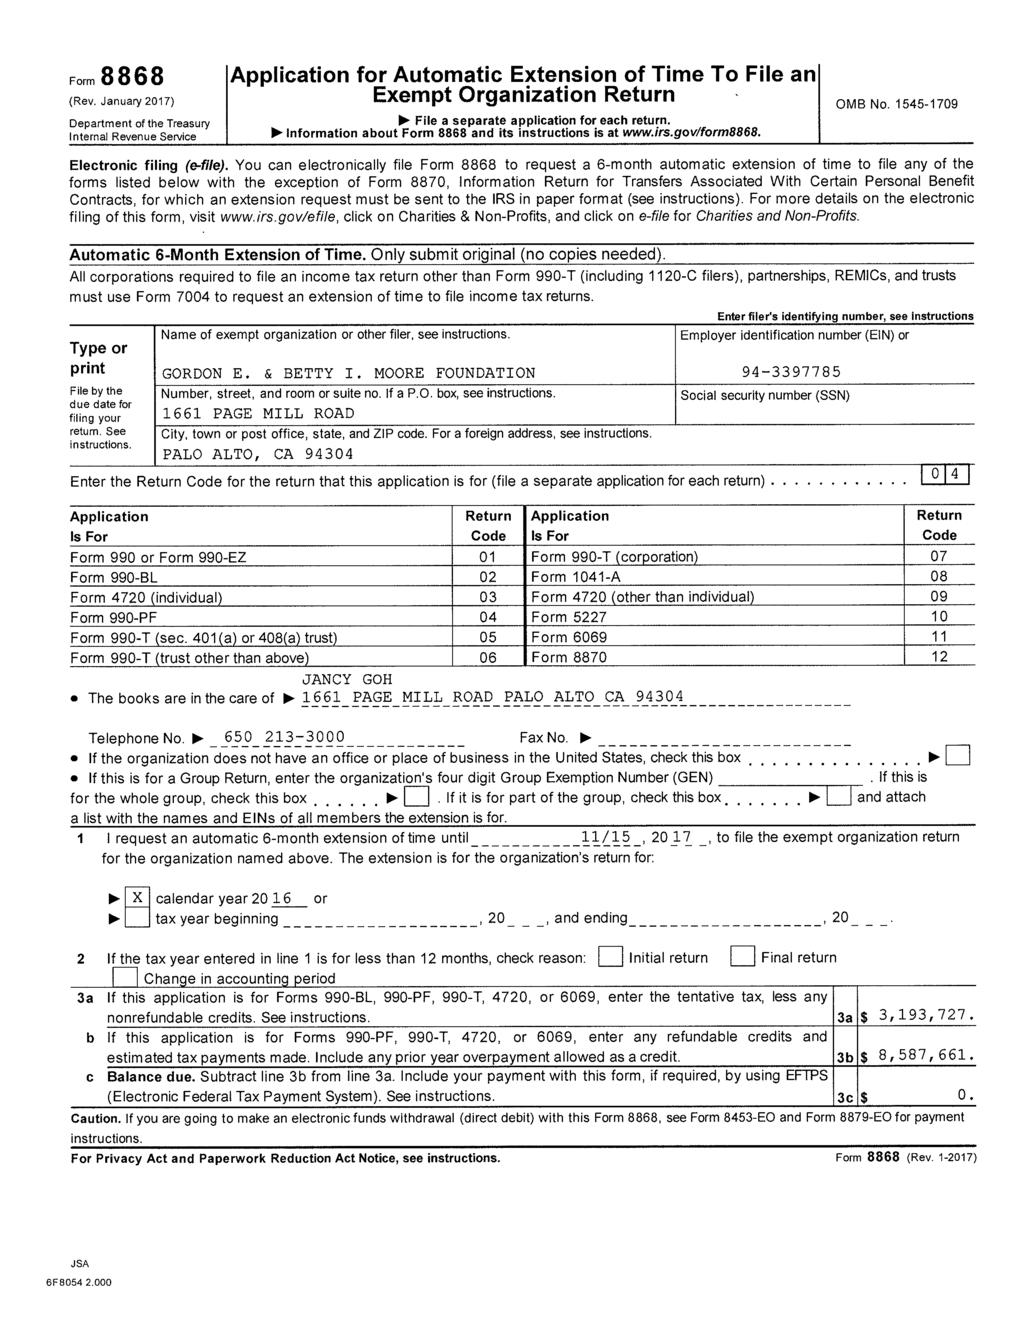 Form 8868 (Rev. January 2017) Department of the Treasury Internal Revenue Service Application for Automatic Extension of Time To File an Exempt Organization Return -.